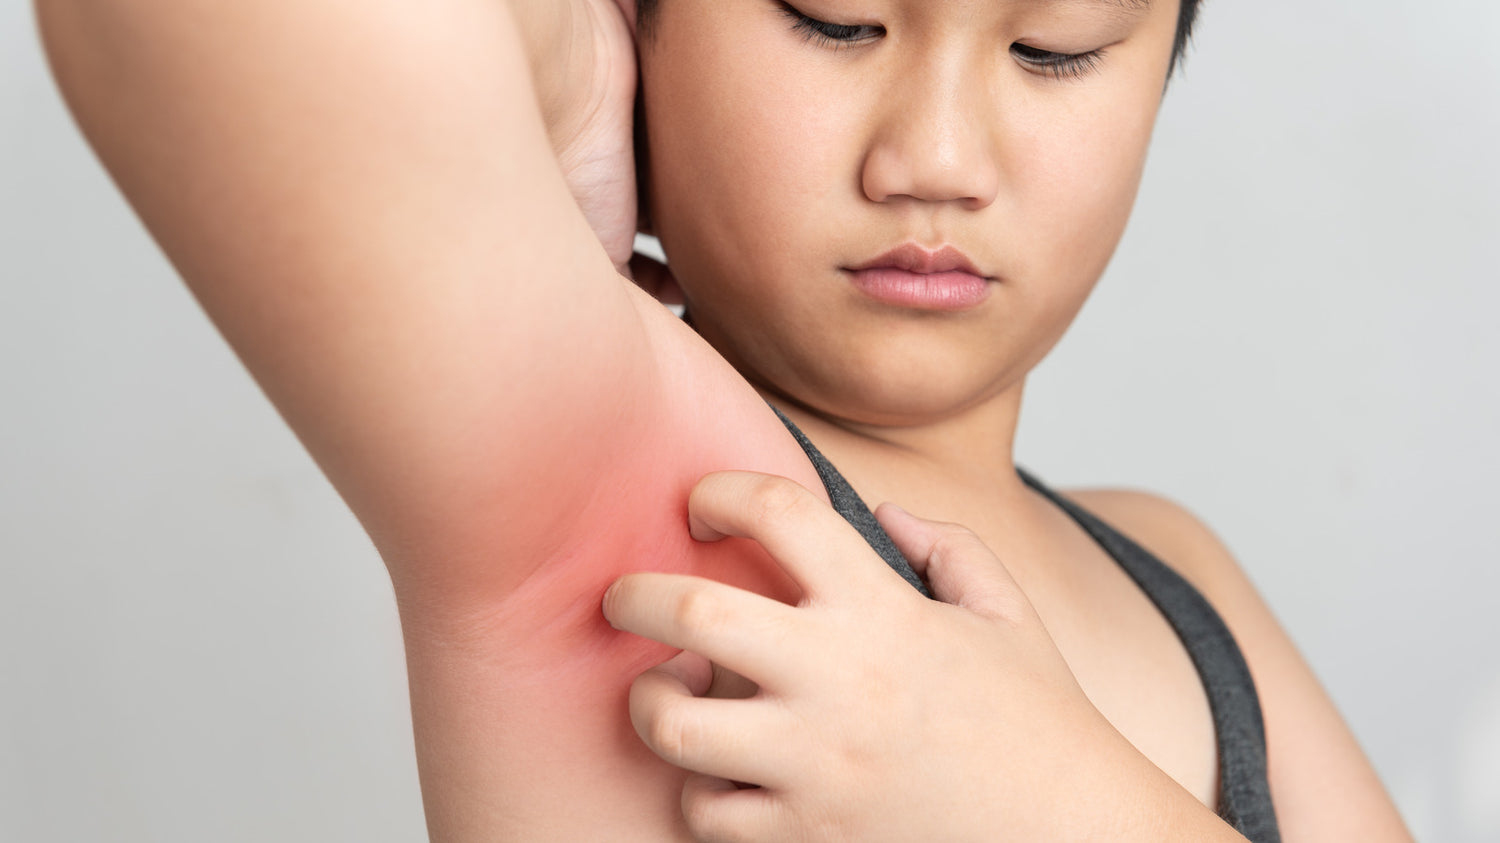 Itching In Armpits? Know These 6 Causes Of Armpit Rashes And Tips